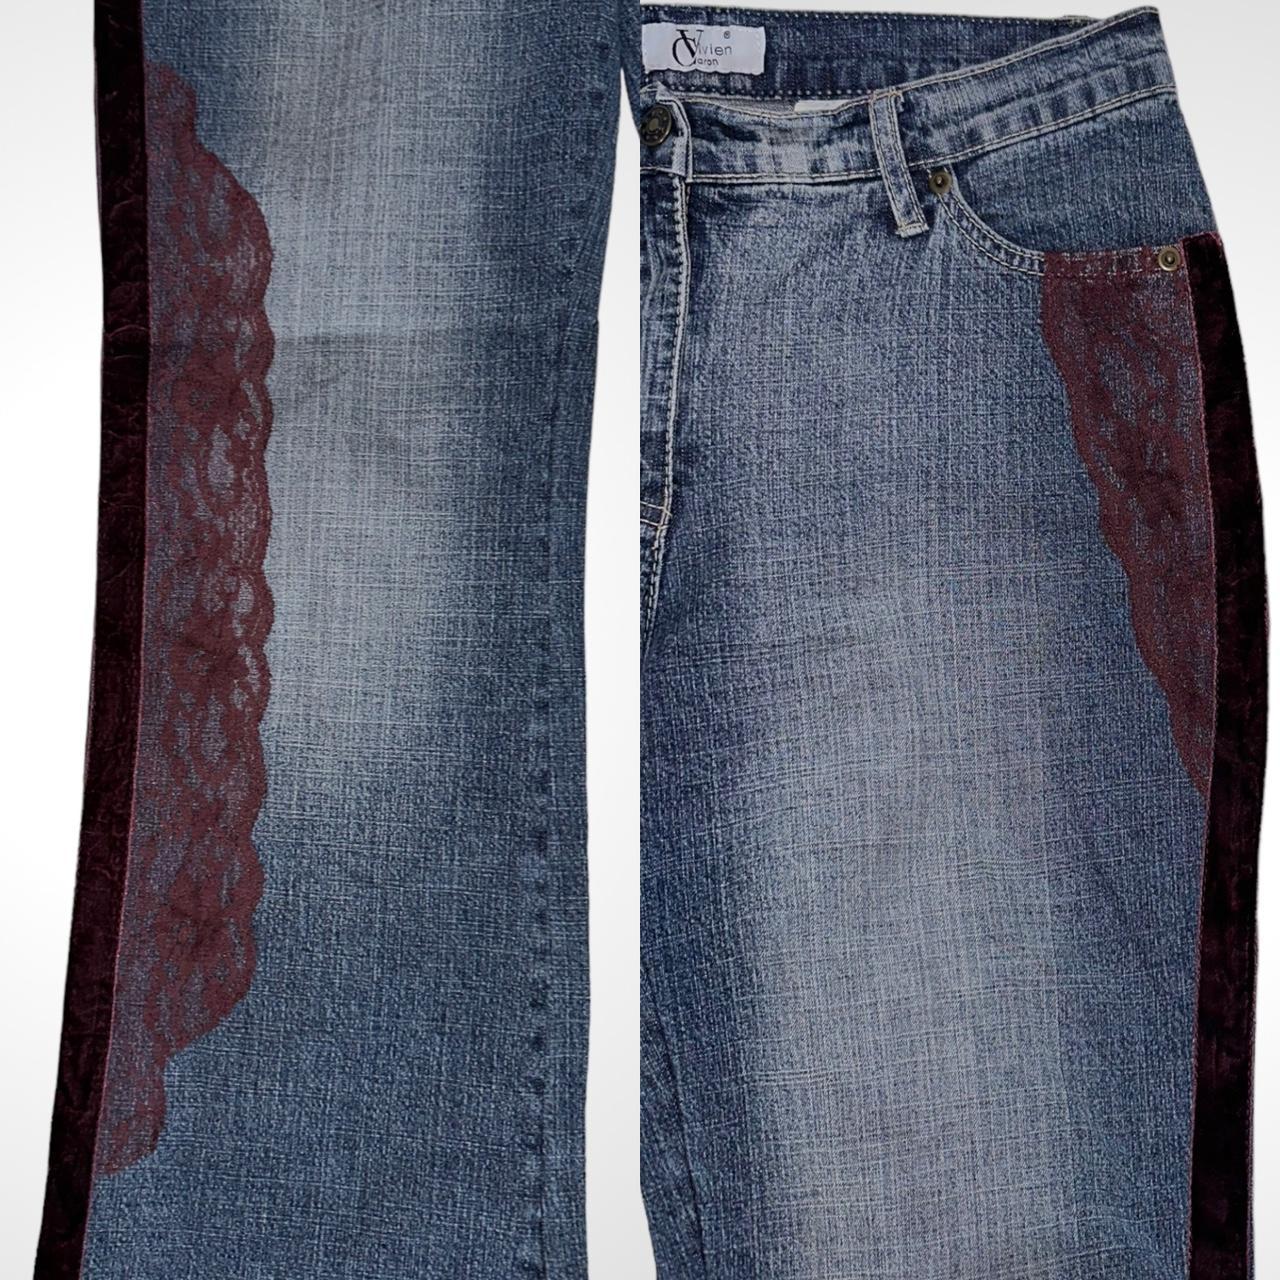 Vintage Y2k denim bootcut jeans with red velour stripe and lace detailing